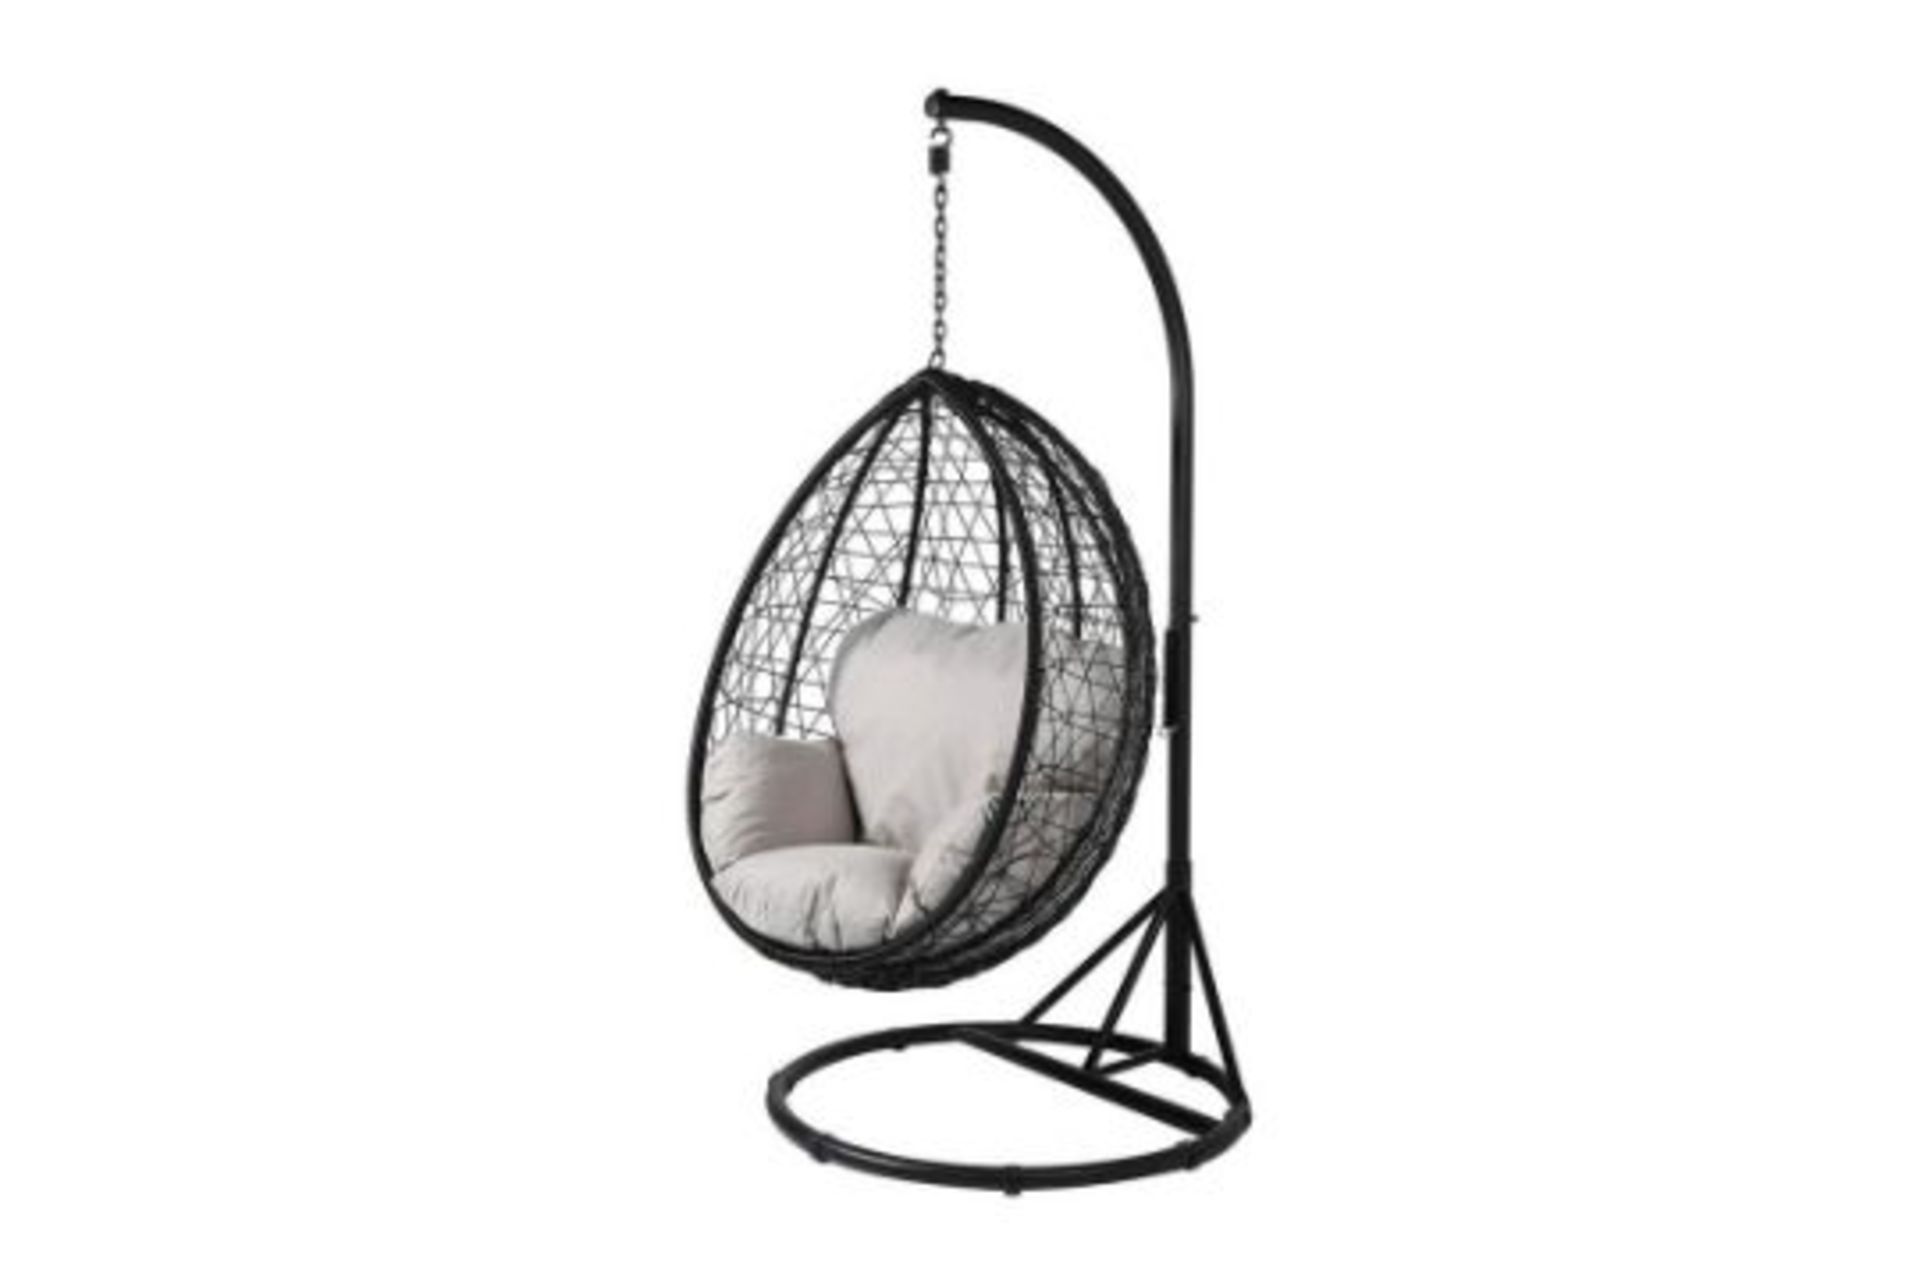 Luxury hanging egg chair. RRp £499. (e/rc) Completely cosy and strikingly stylish, this Luxury